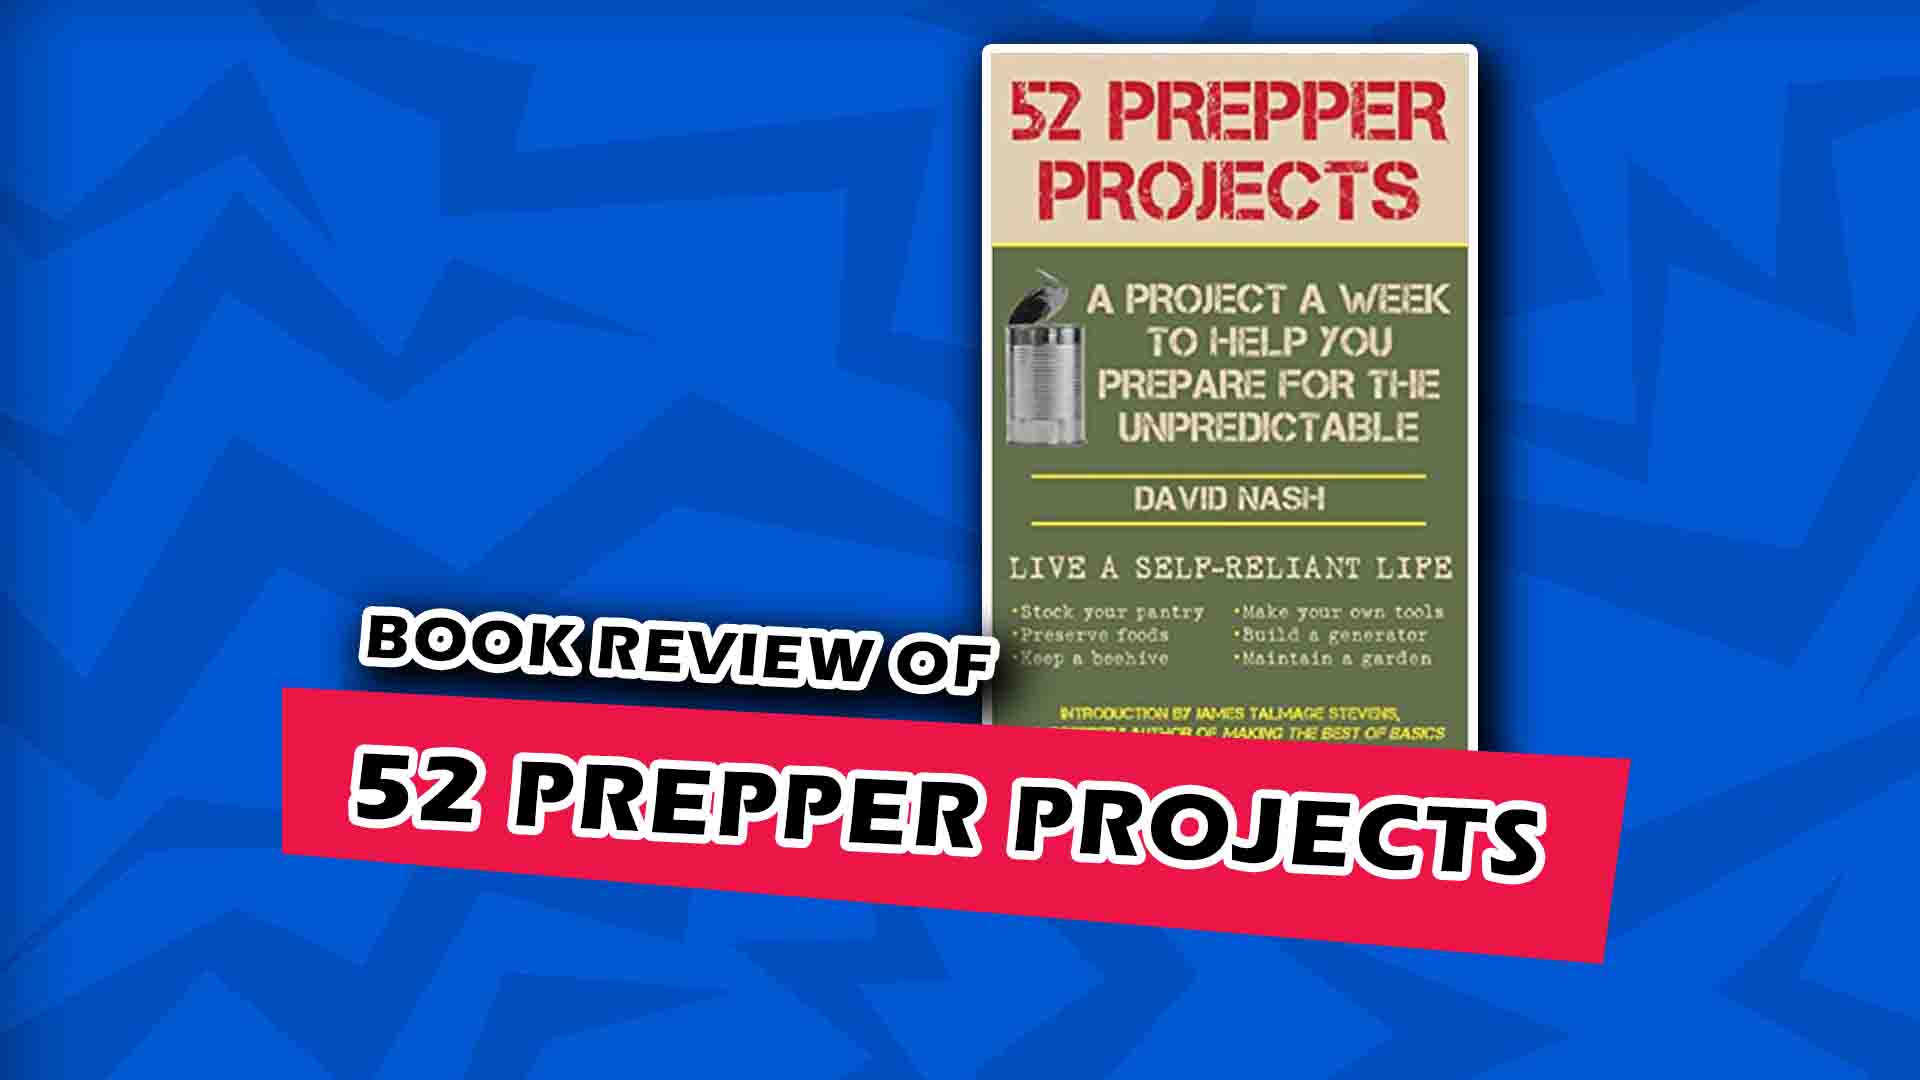 52 Prepper Projects Book Review